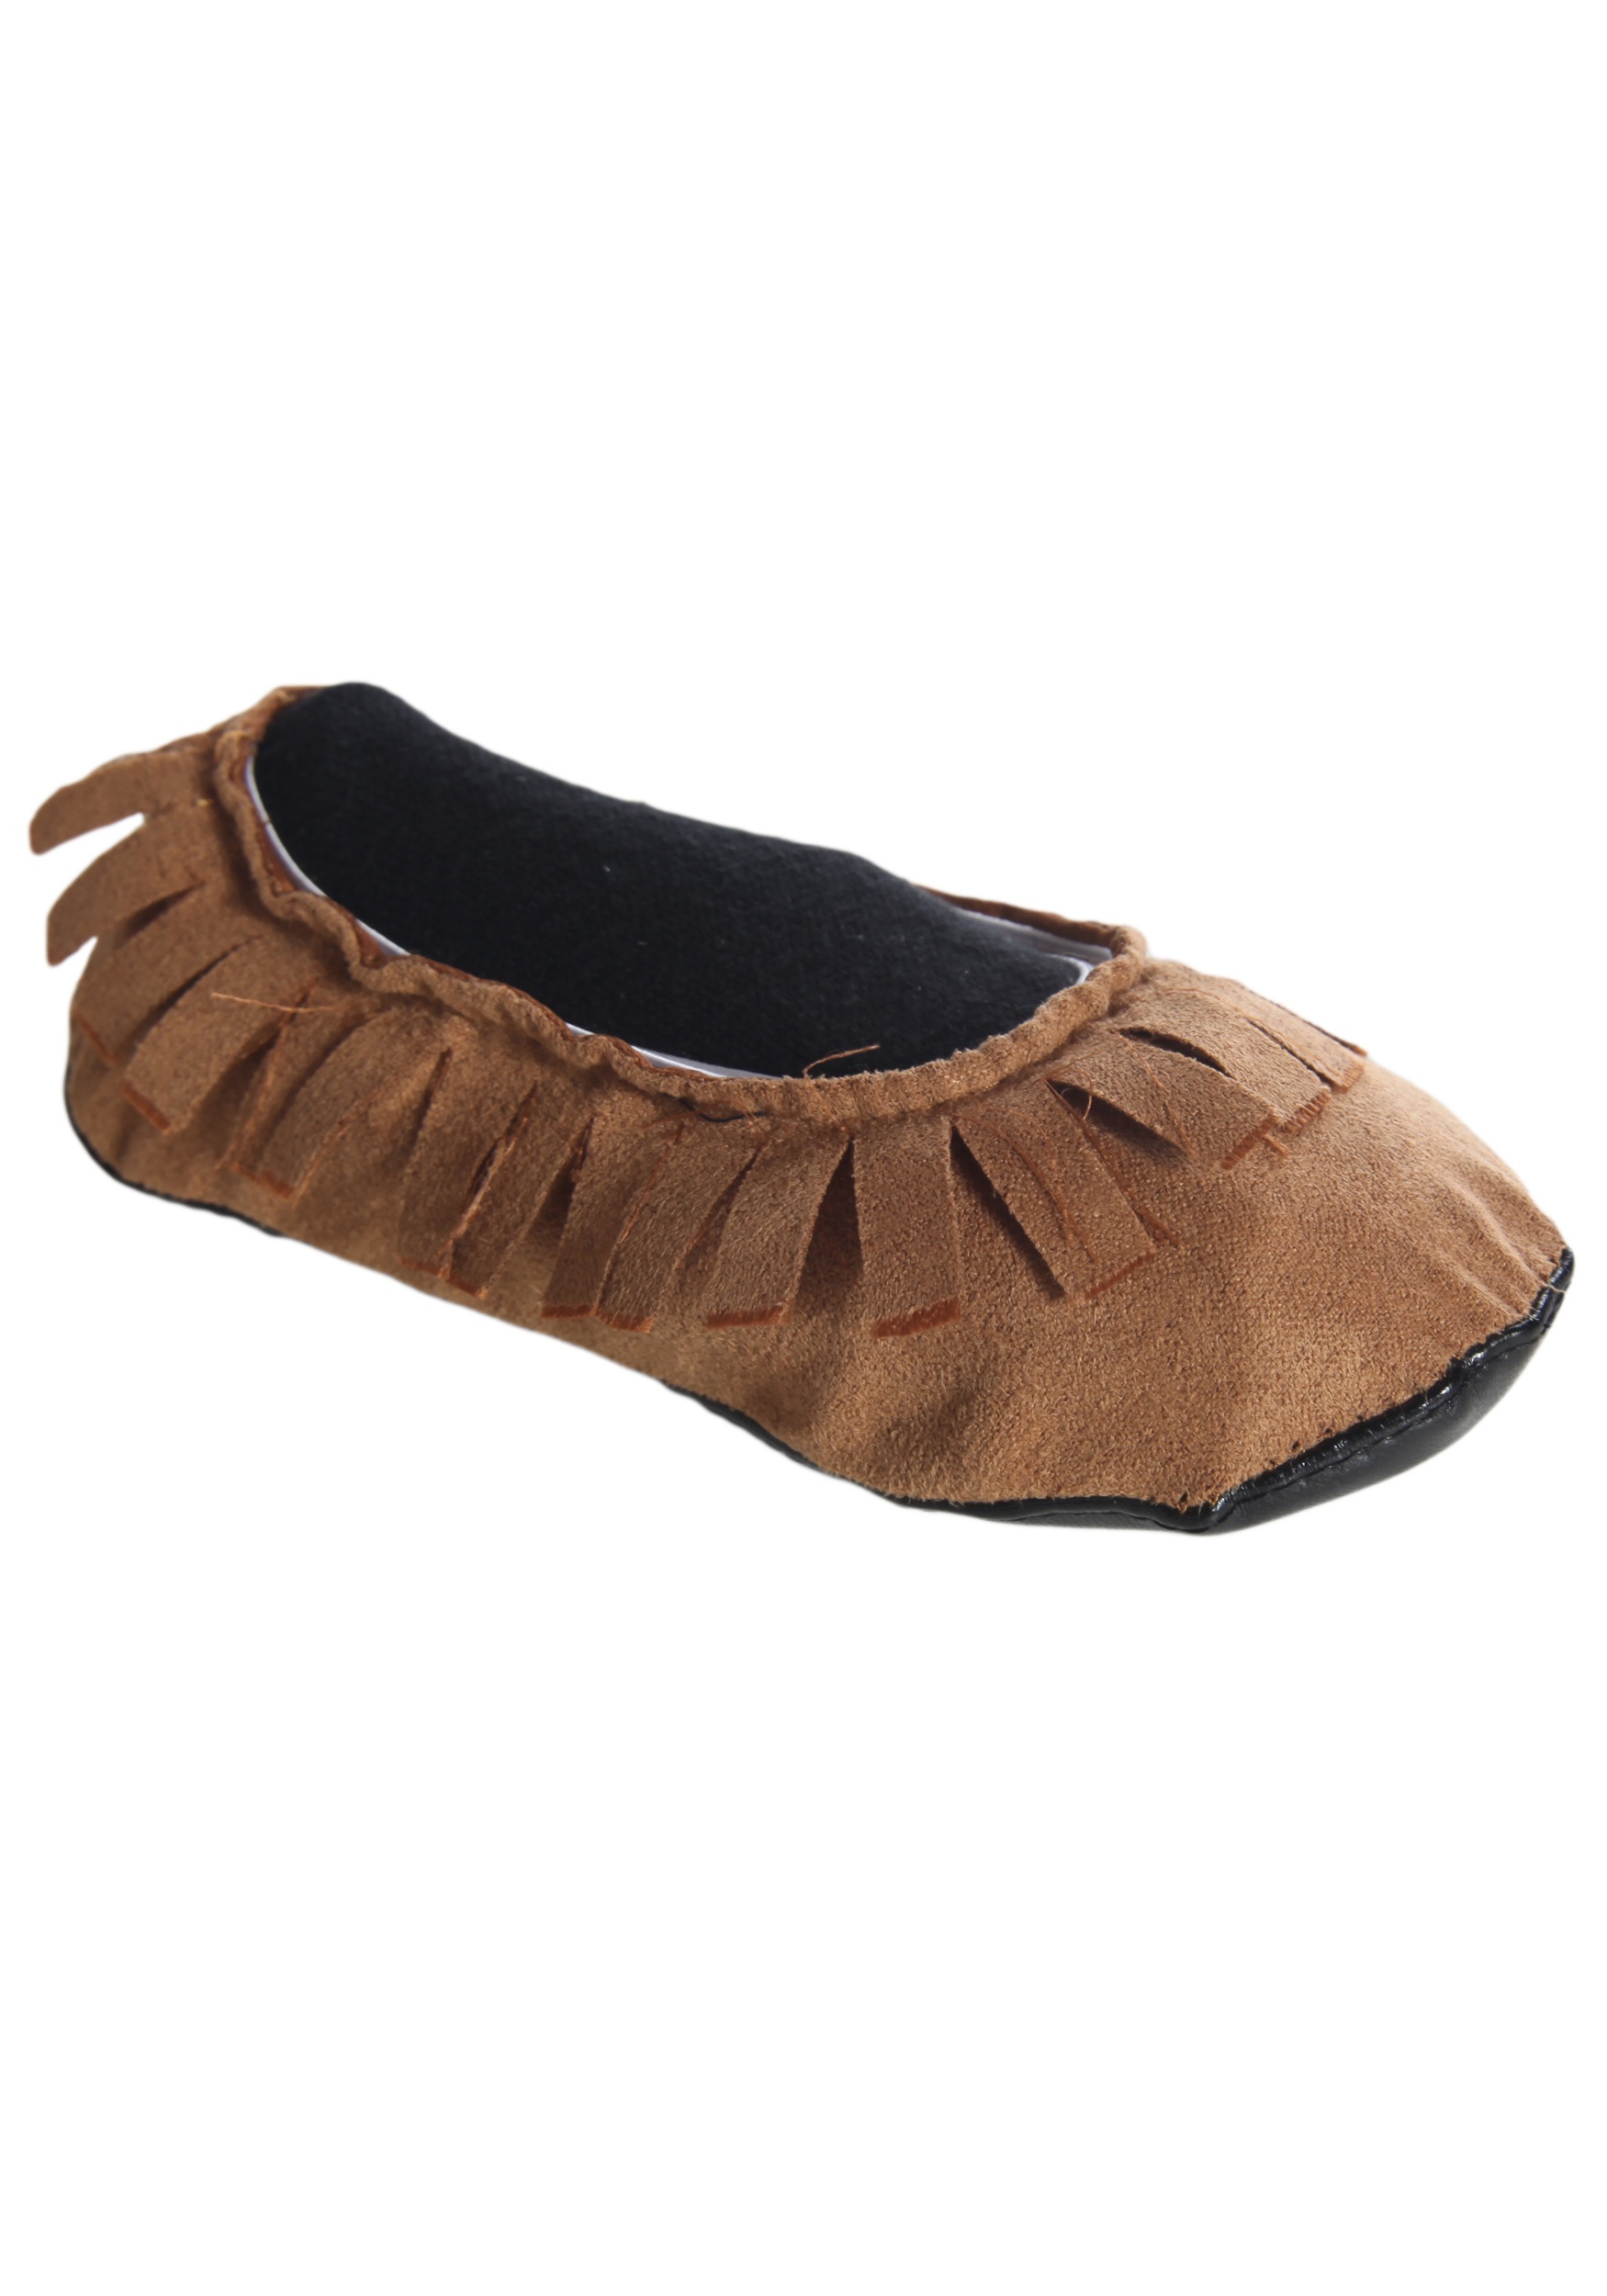 Toddlers/Kids Costume Moccasins